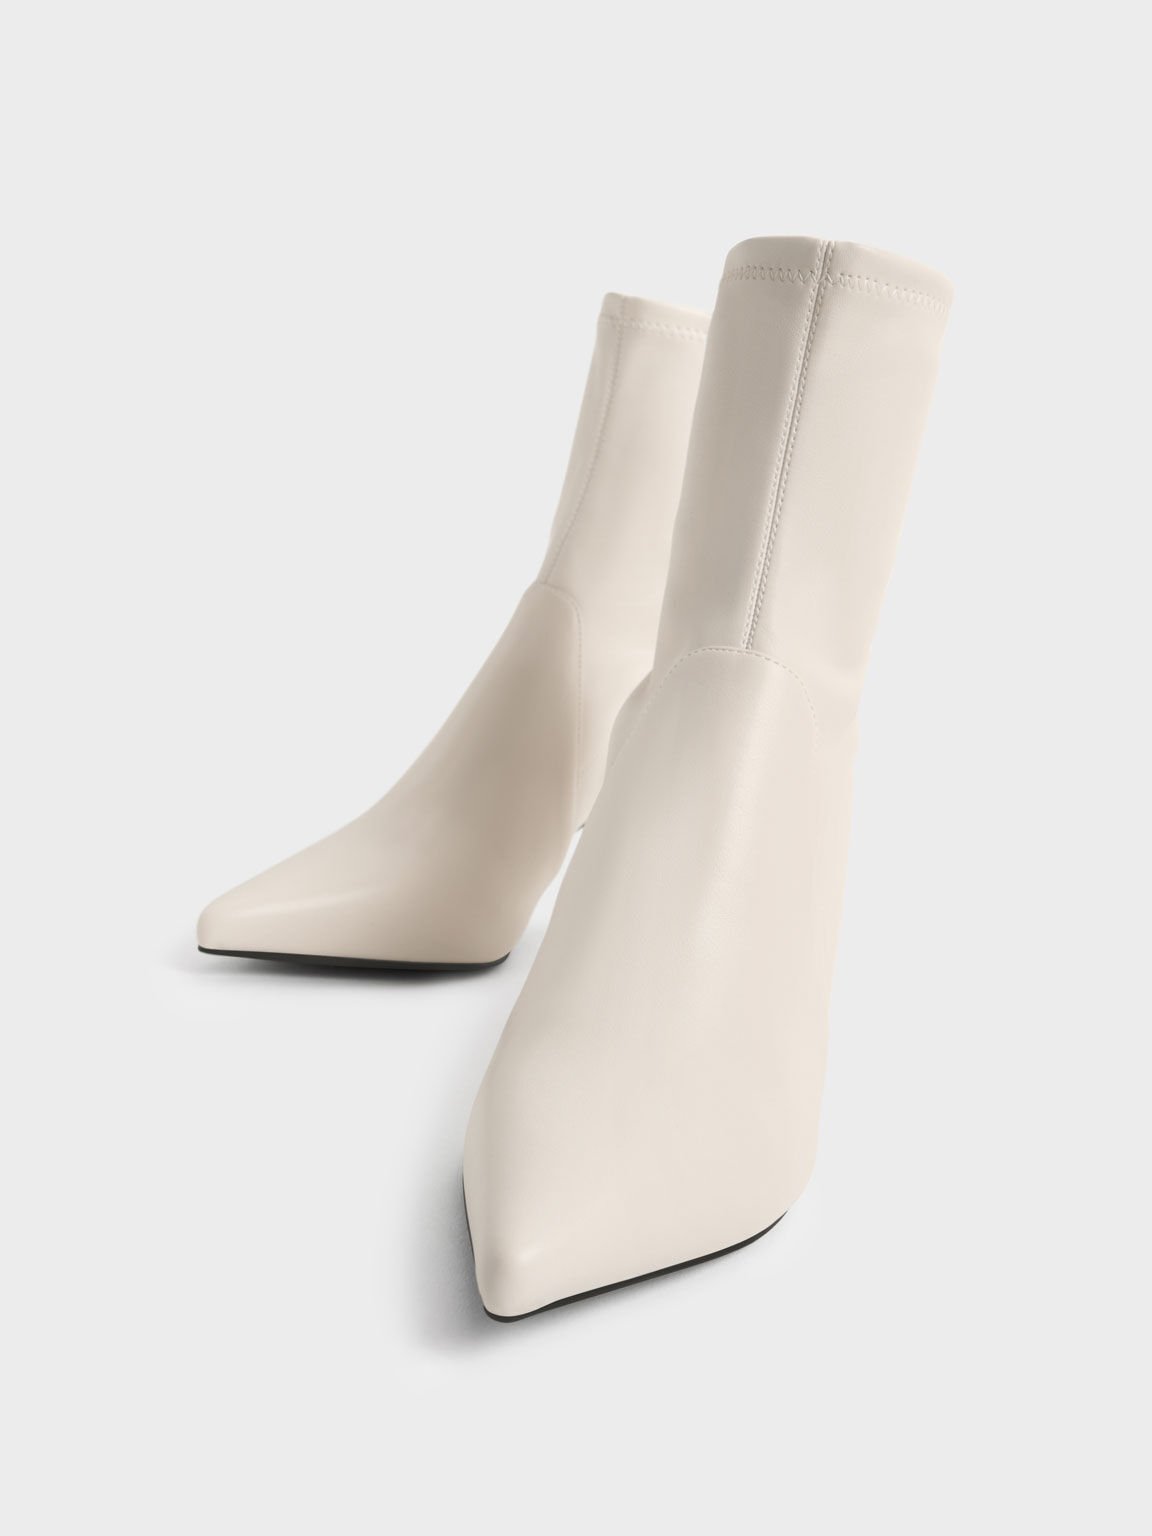 Chalk Kitten Heel Ankle Boots - CHARLES & KEITH US